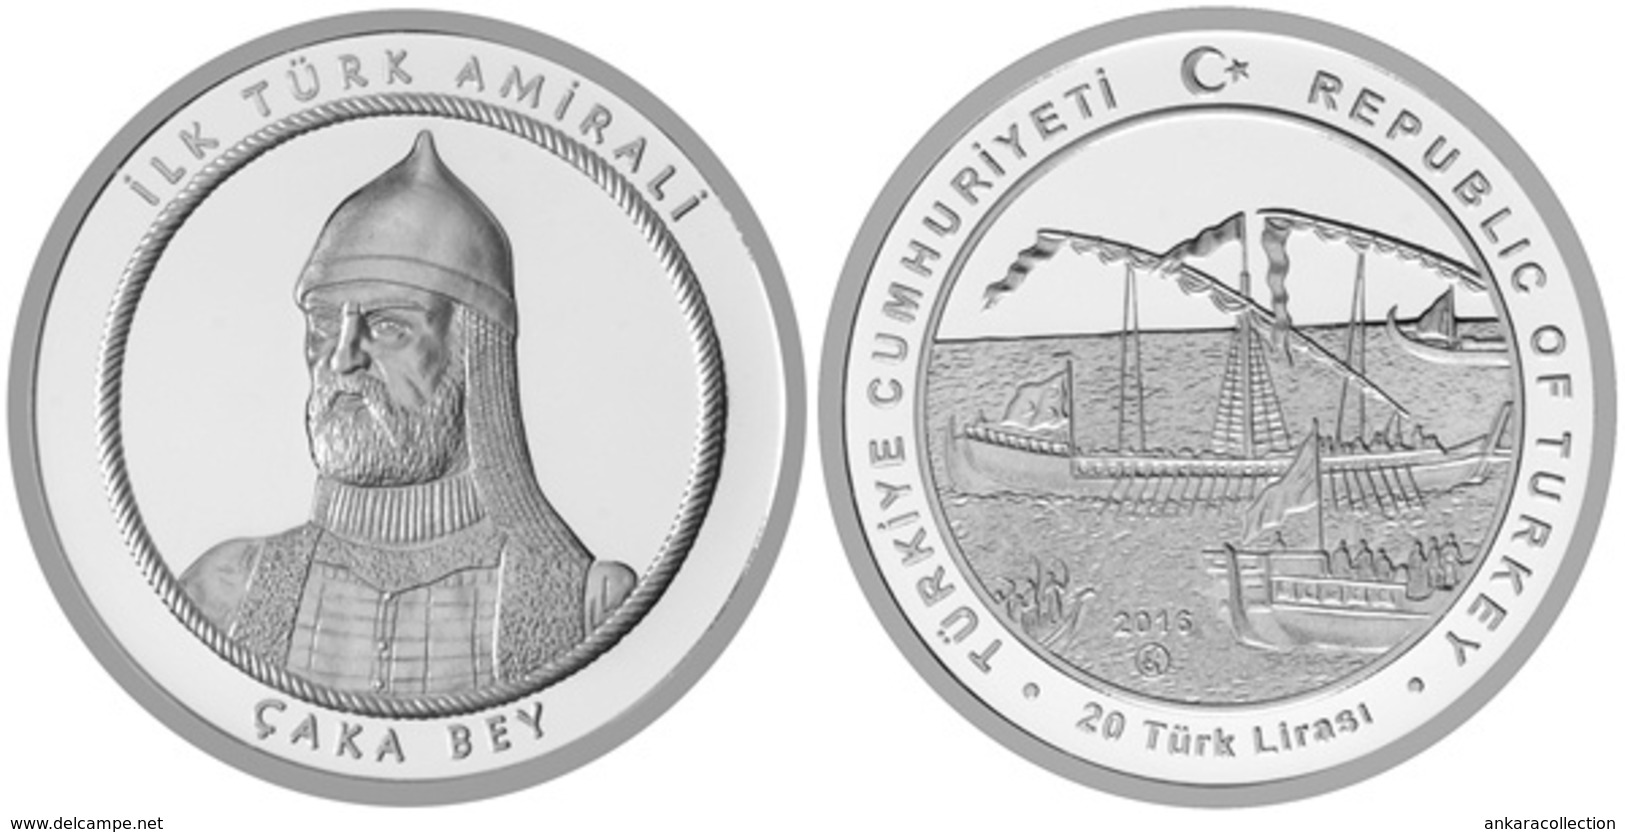 AC - CAKA BEY - CHAKA BEY - TZACHAS - FIRST TURKISH ADMIRAL COMMEMORATIVE SILVER COIN TURKEY 2016 PROOF - UNCIRCULATED - Unclassified